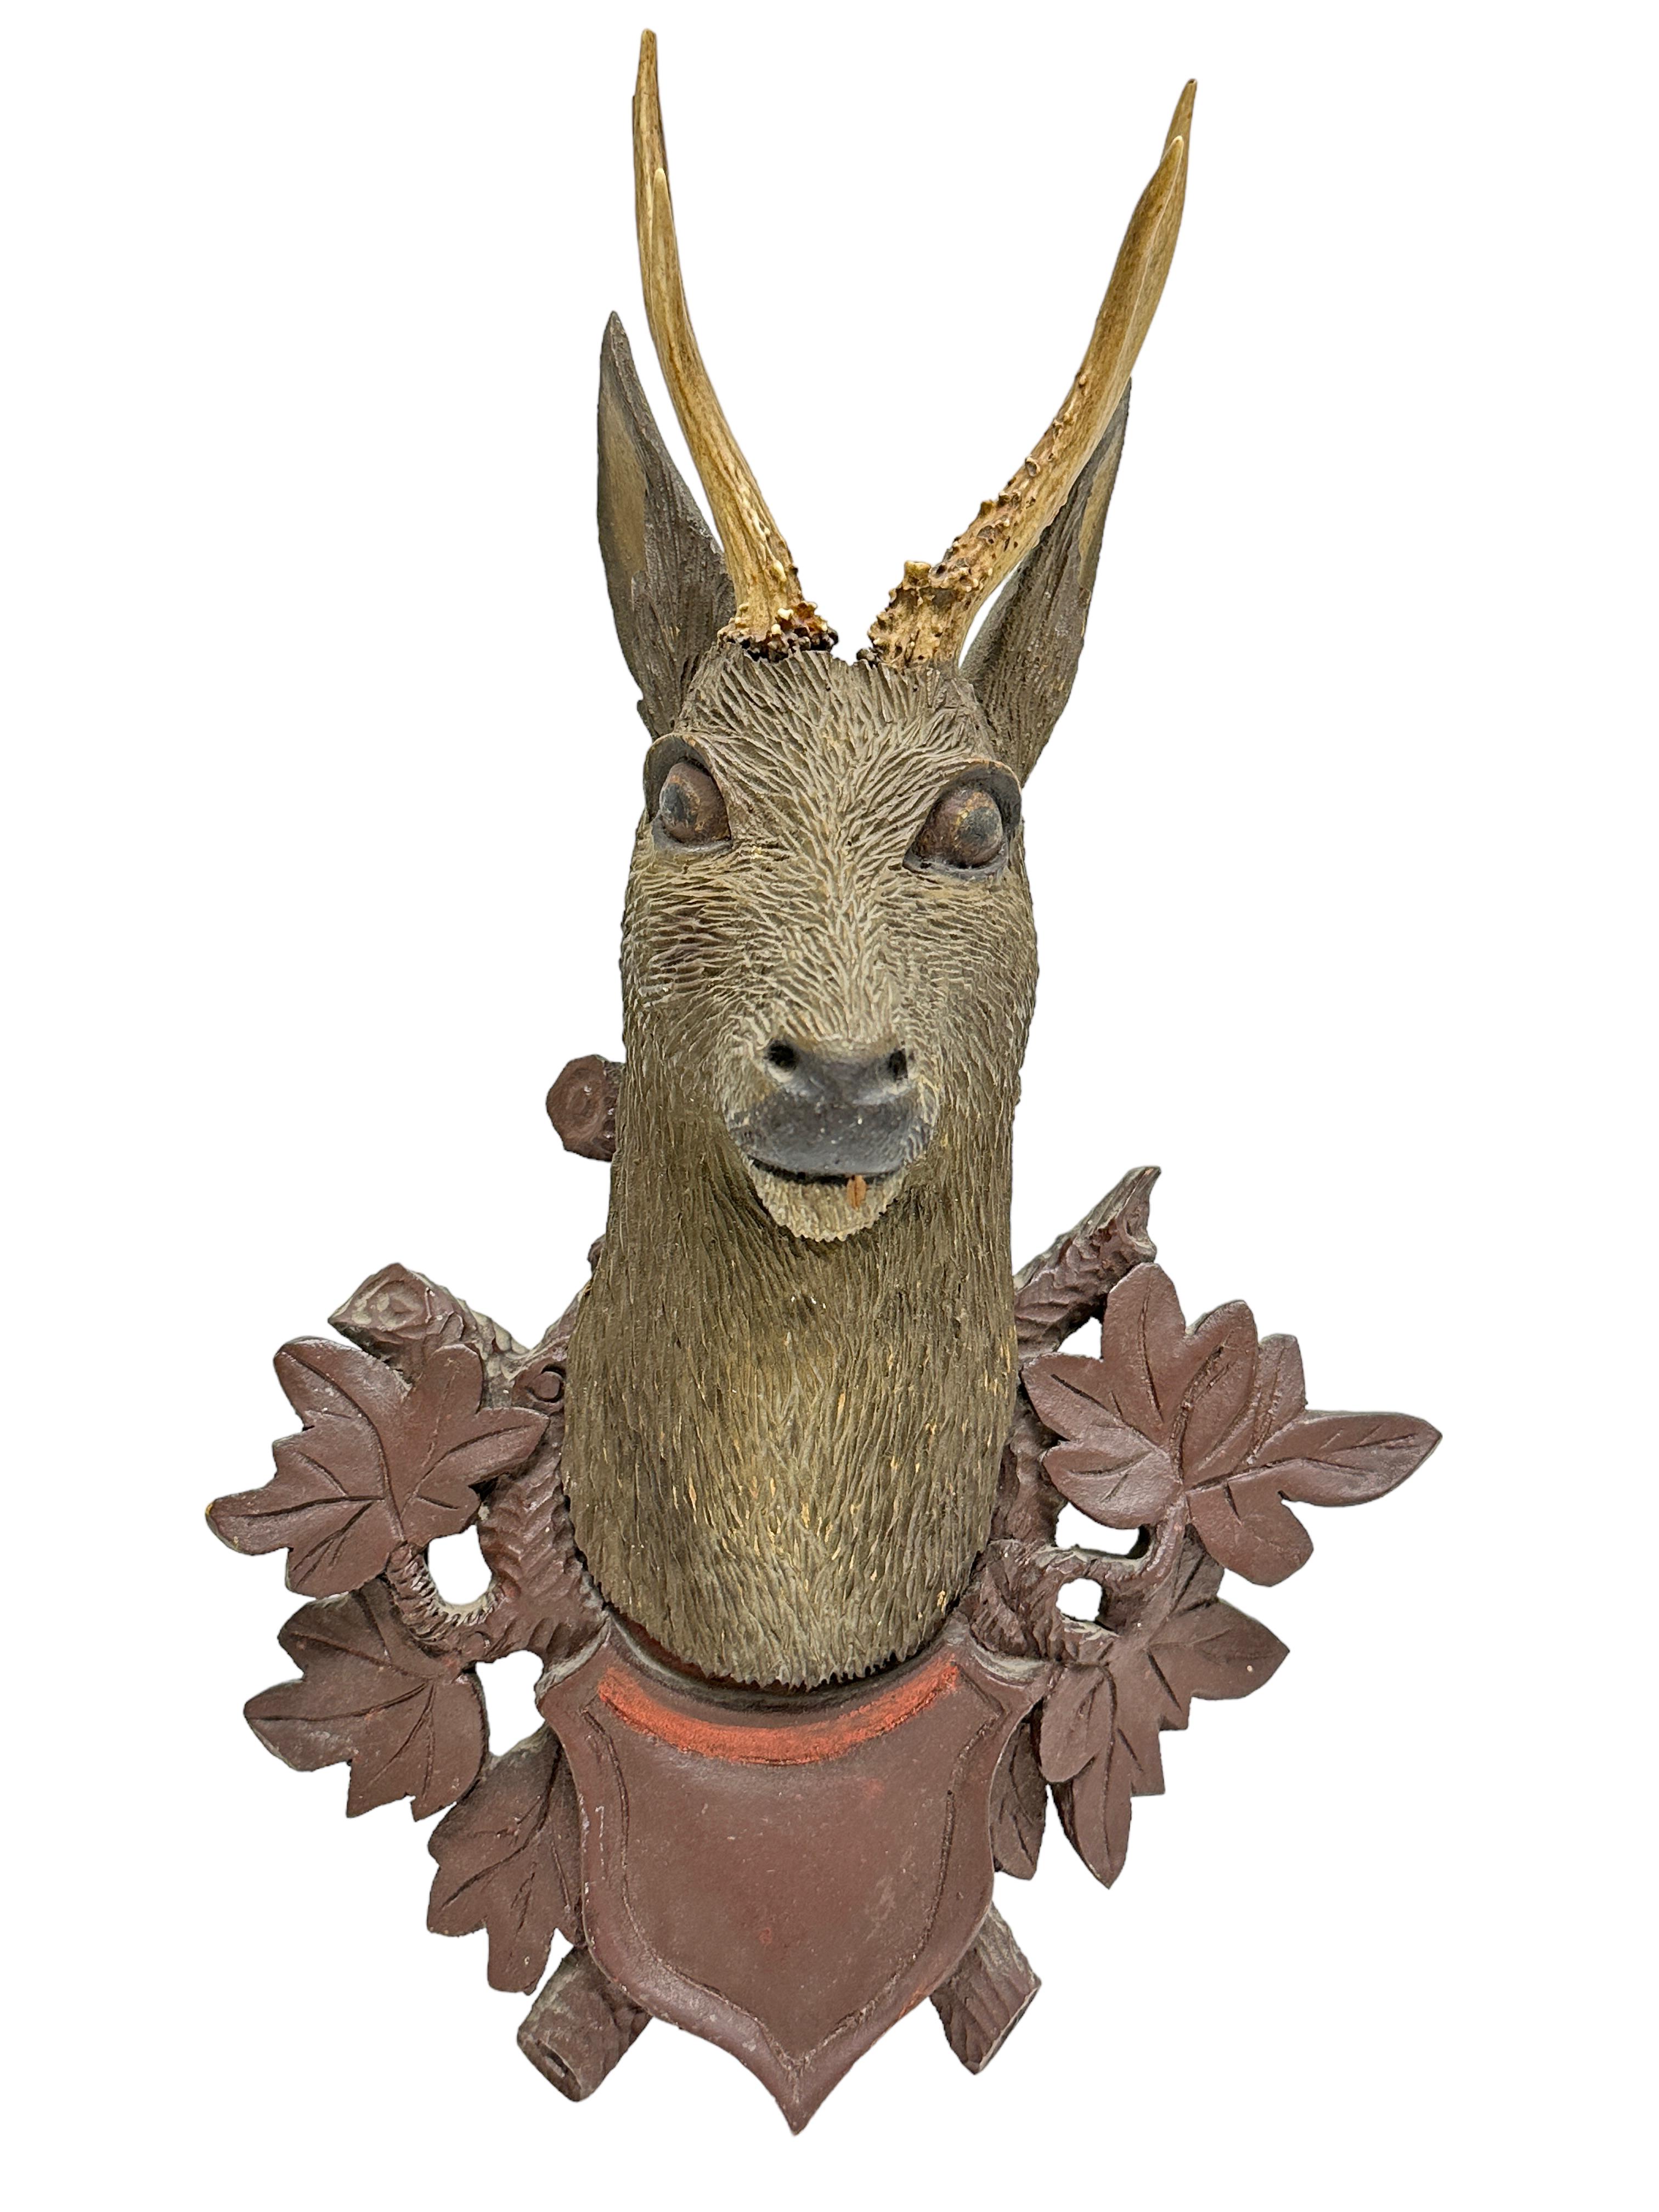 Black Forest Beautiful Folk Art Wood Carved Deer Head with Real Antlers, Germany 19th Century